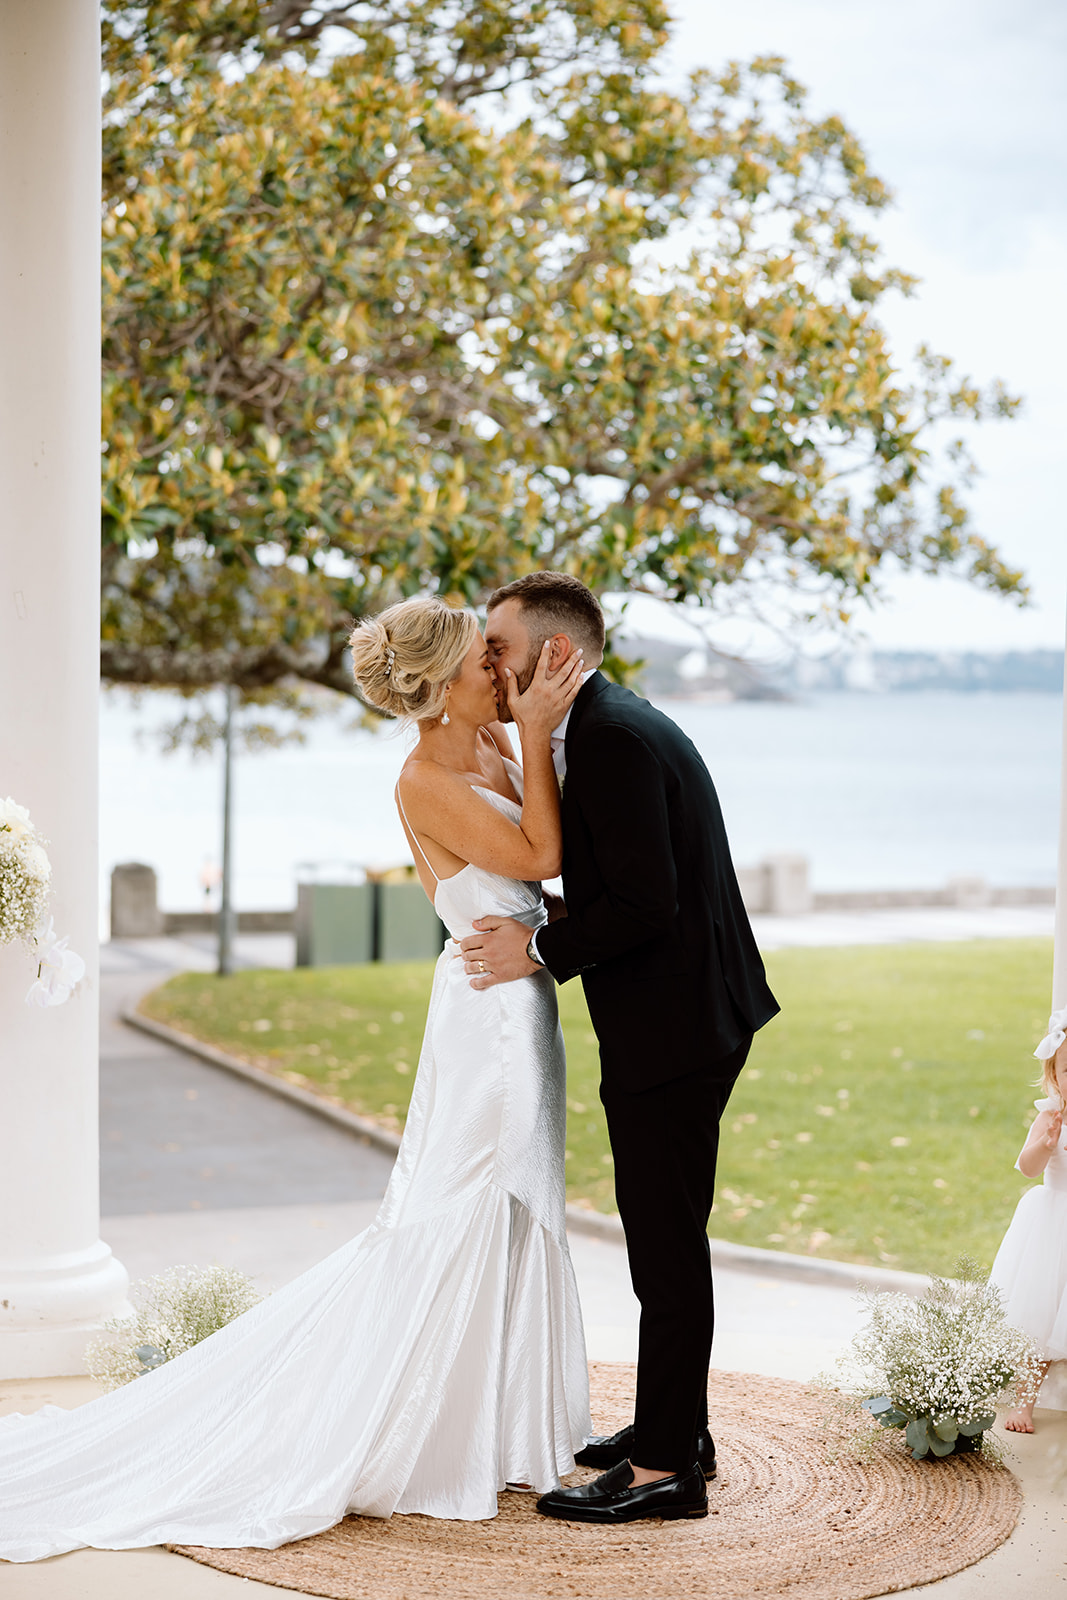 Bride and groom first kiss at the wedding in The Fernery Mosman